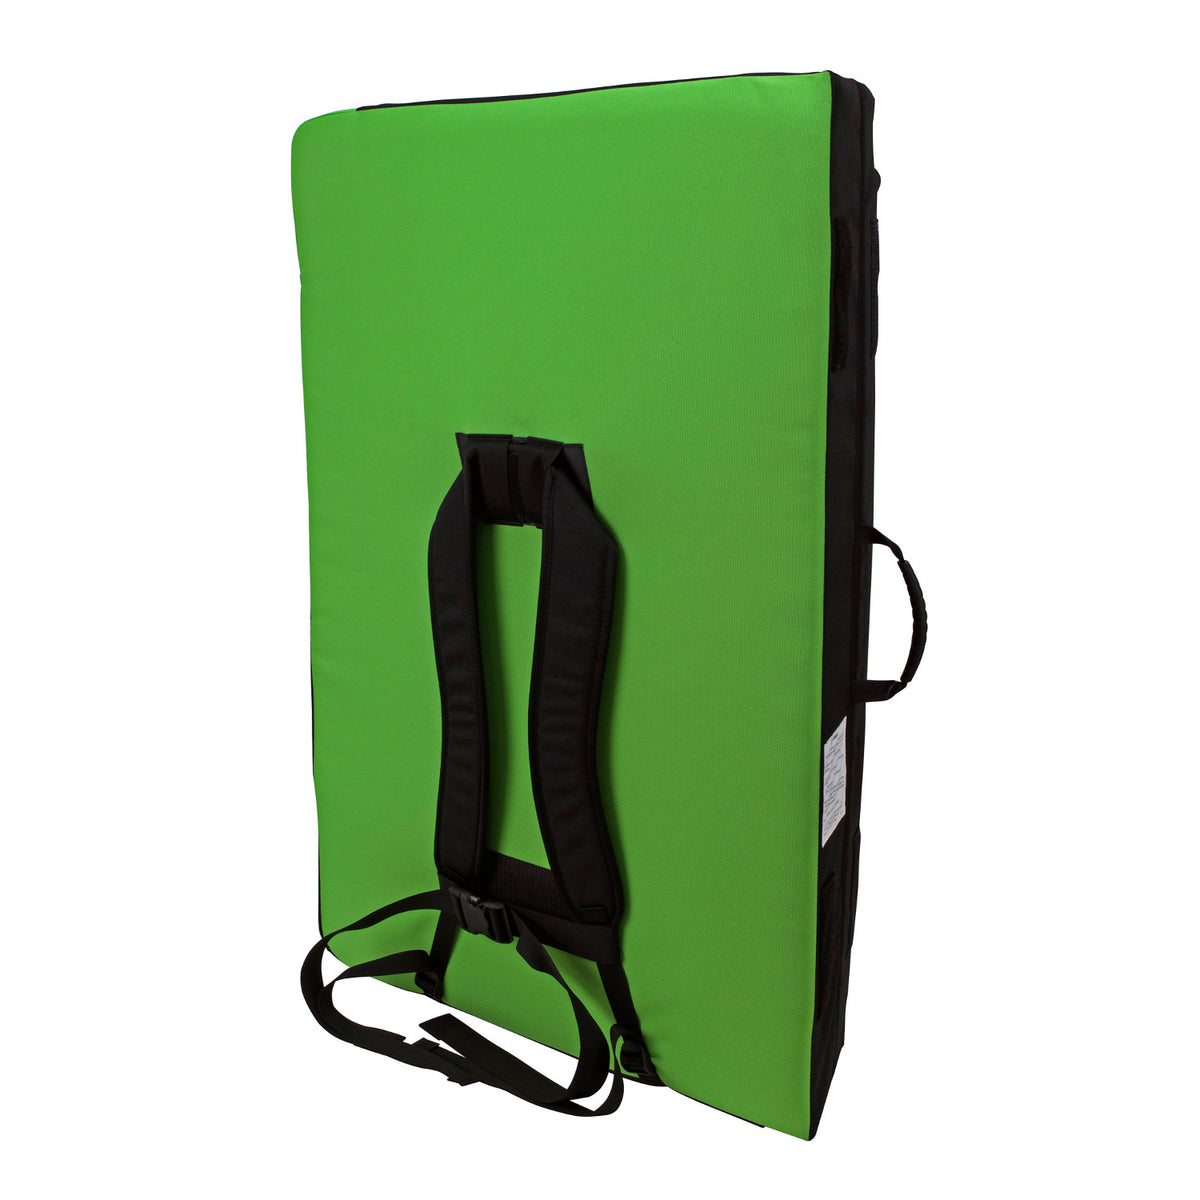 Metolius Session II crash pad, showing reverse side with shoulder straps